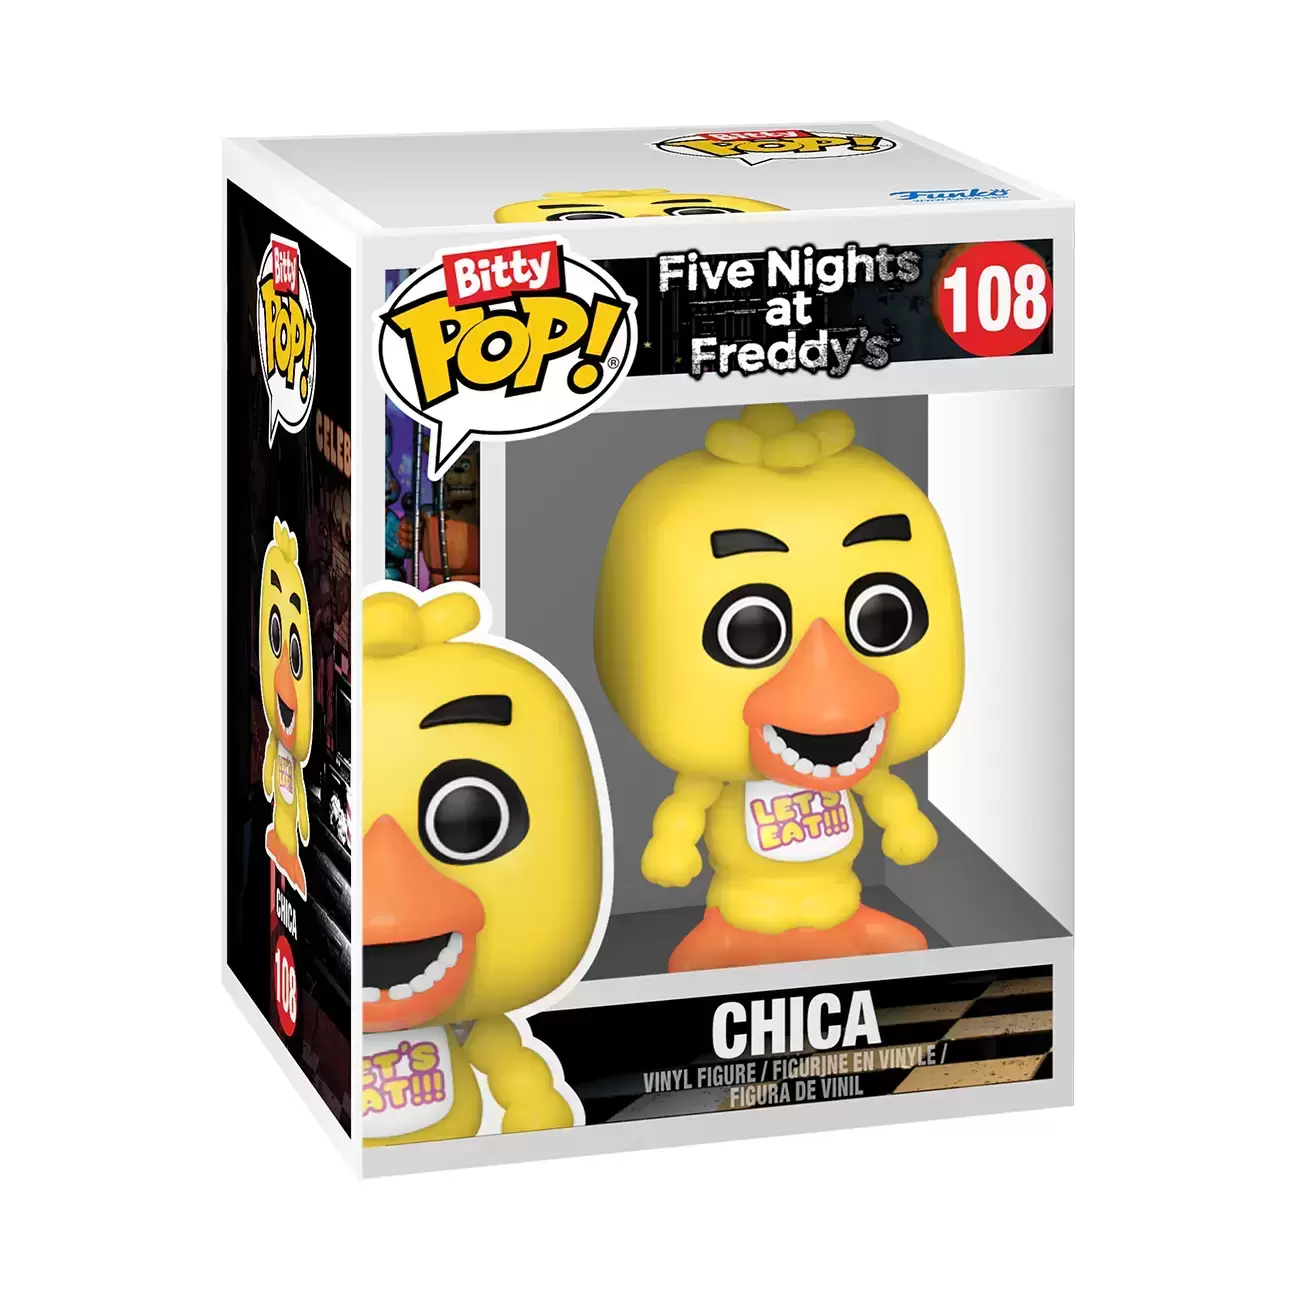 Bitty POP! - Five Nights At Freddy\'s - Chica